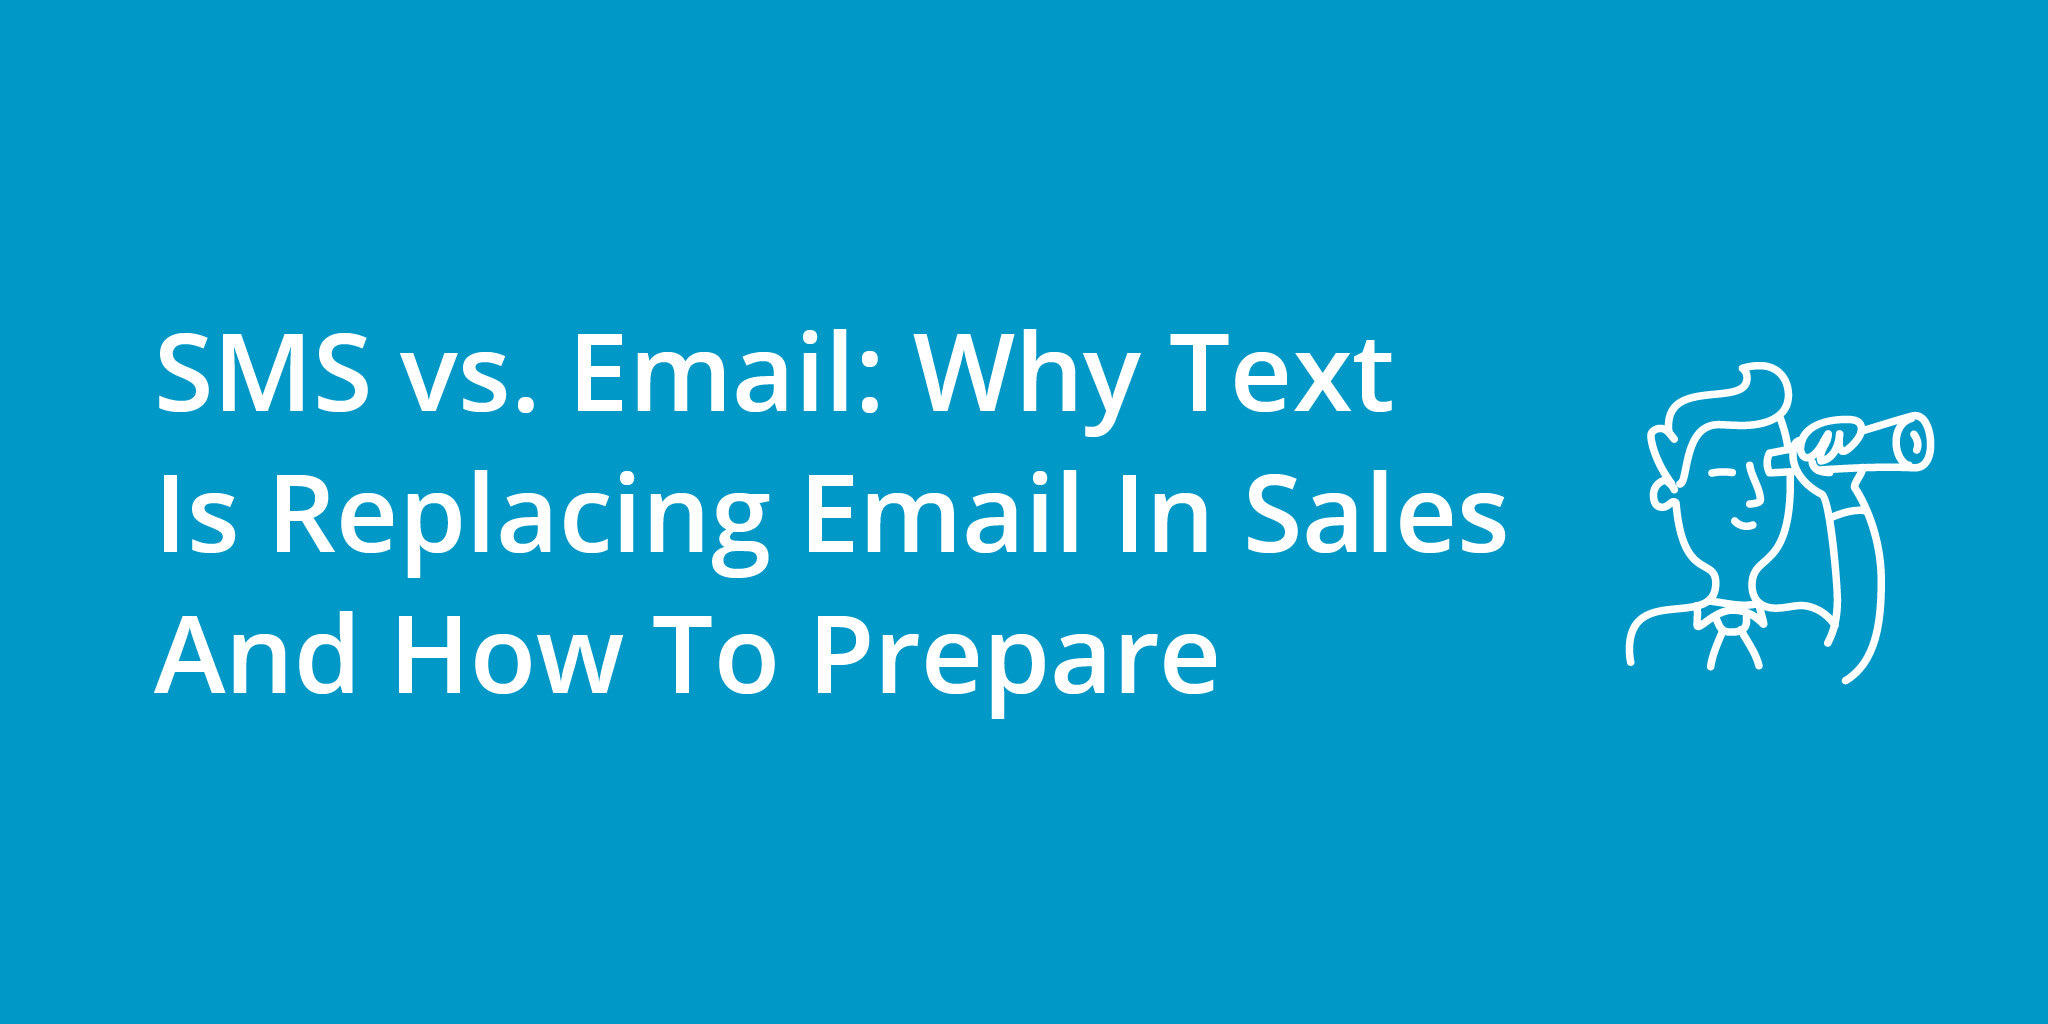 sms-vs-email-why-text-is-replacing-email-in-sales-and-how-to-prepare